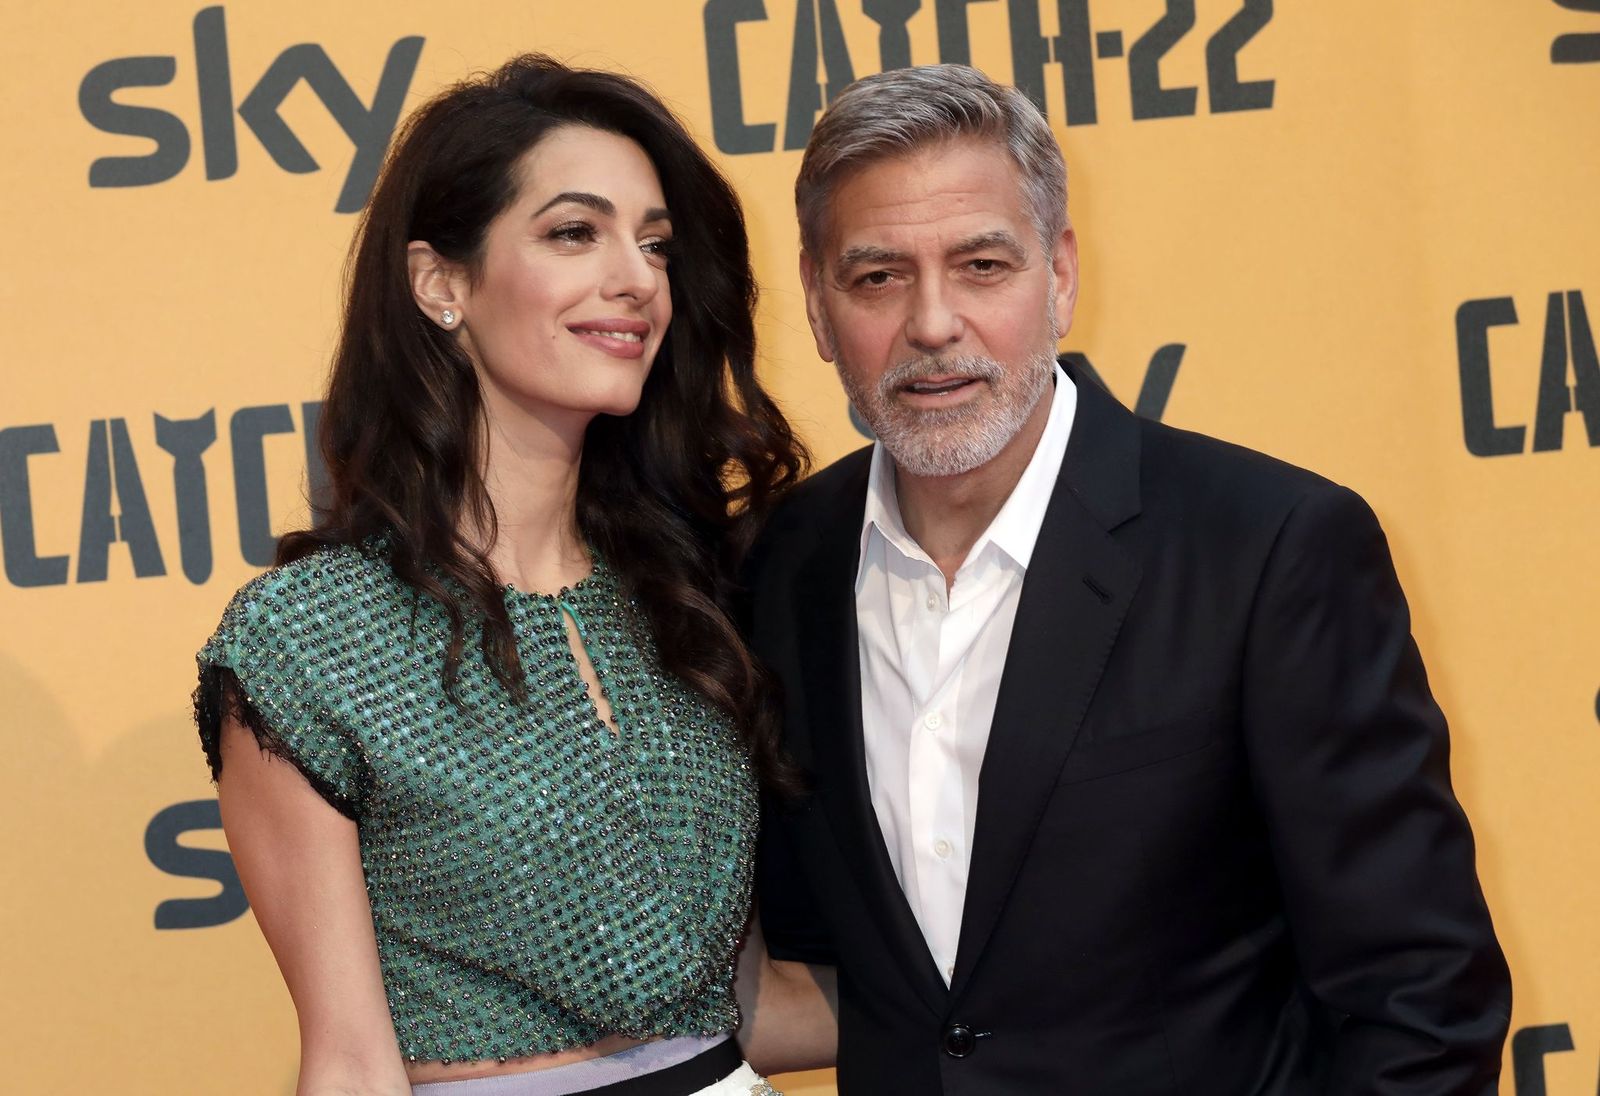 Amal Alamuddin and George Clooney at 'Catch-22' Photocall, a Sky production, at The Space Moderno Cinema on May 13, 2019 | Photo: Getty Images